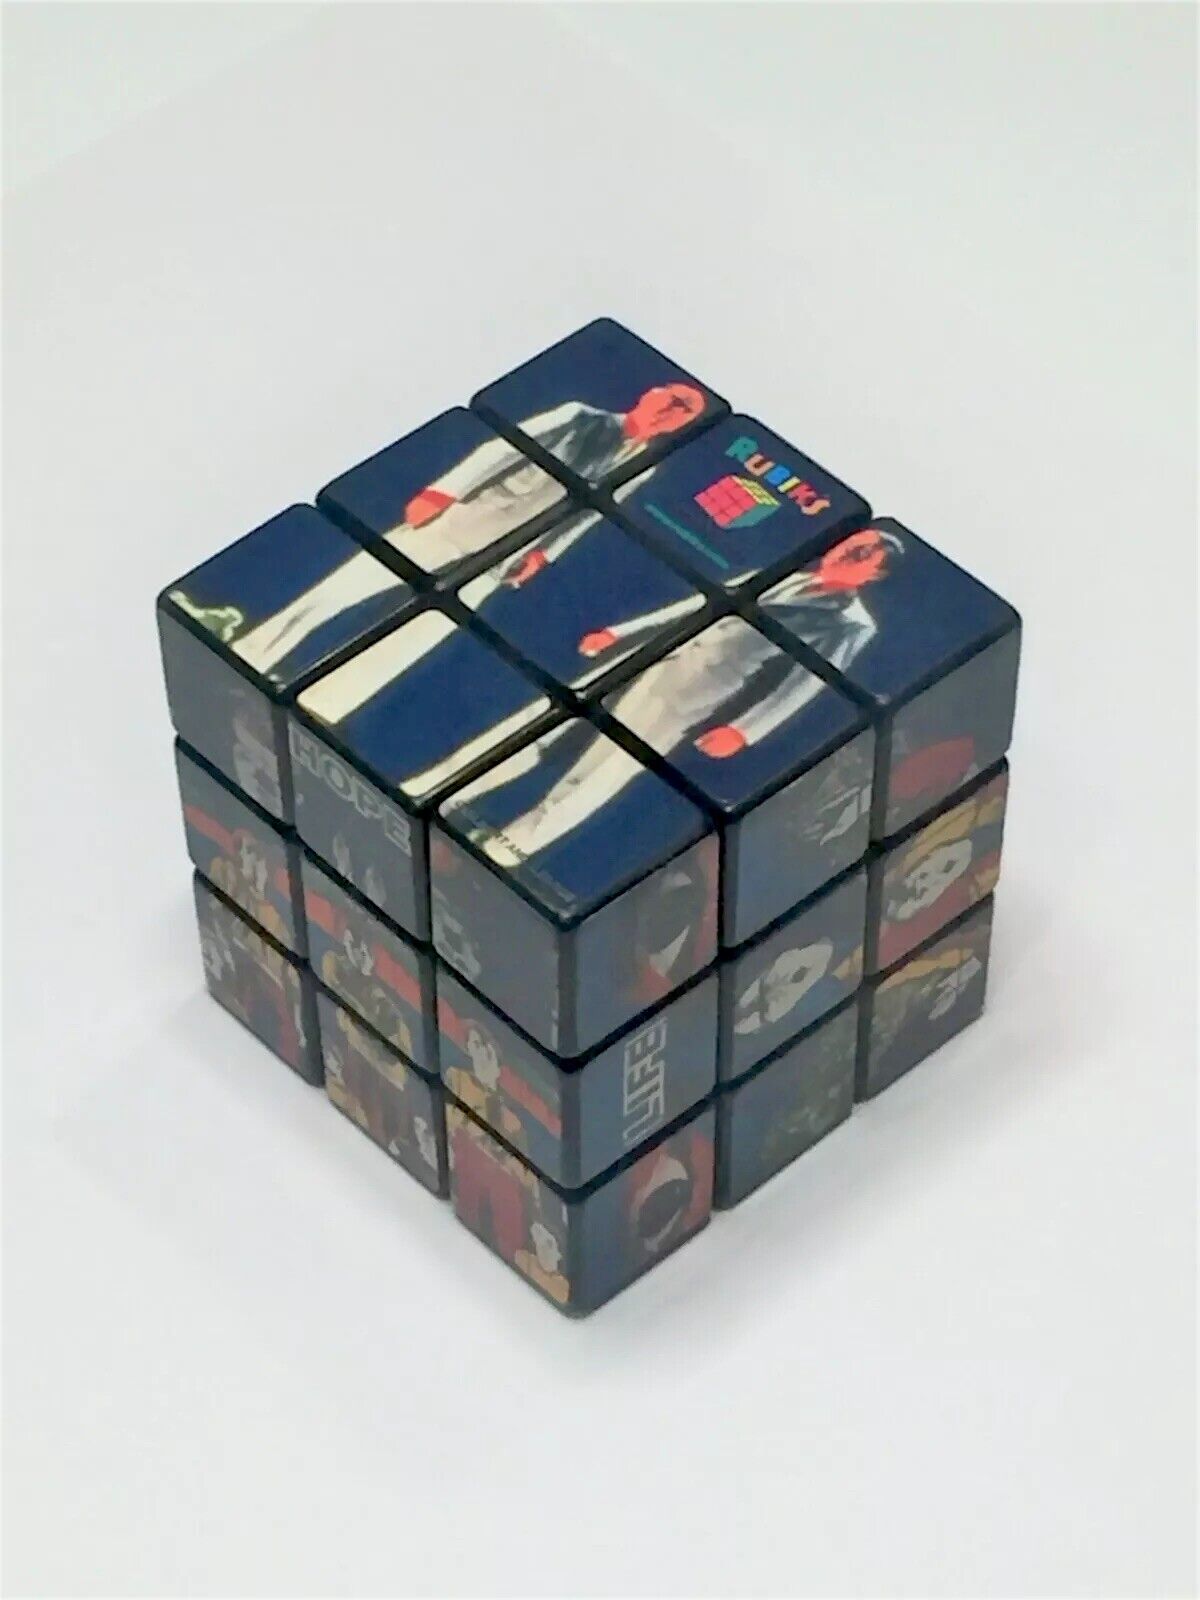 Gilbert + George - Hope Fear Death Life Rubiks Cube - Limited Edition Art Puzzle